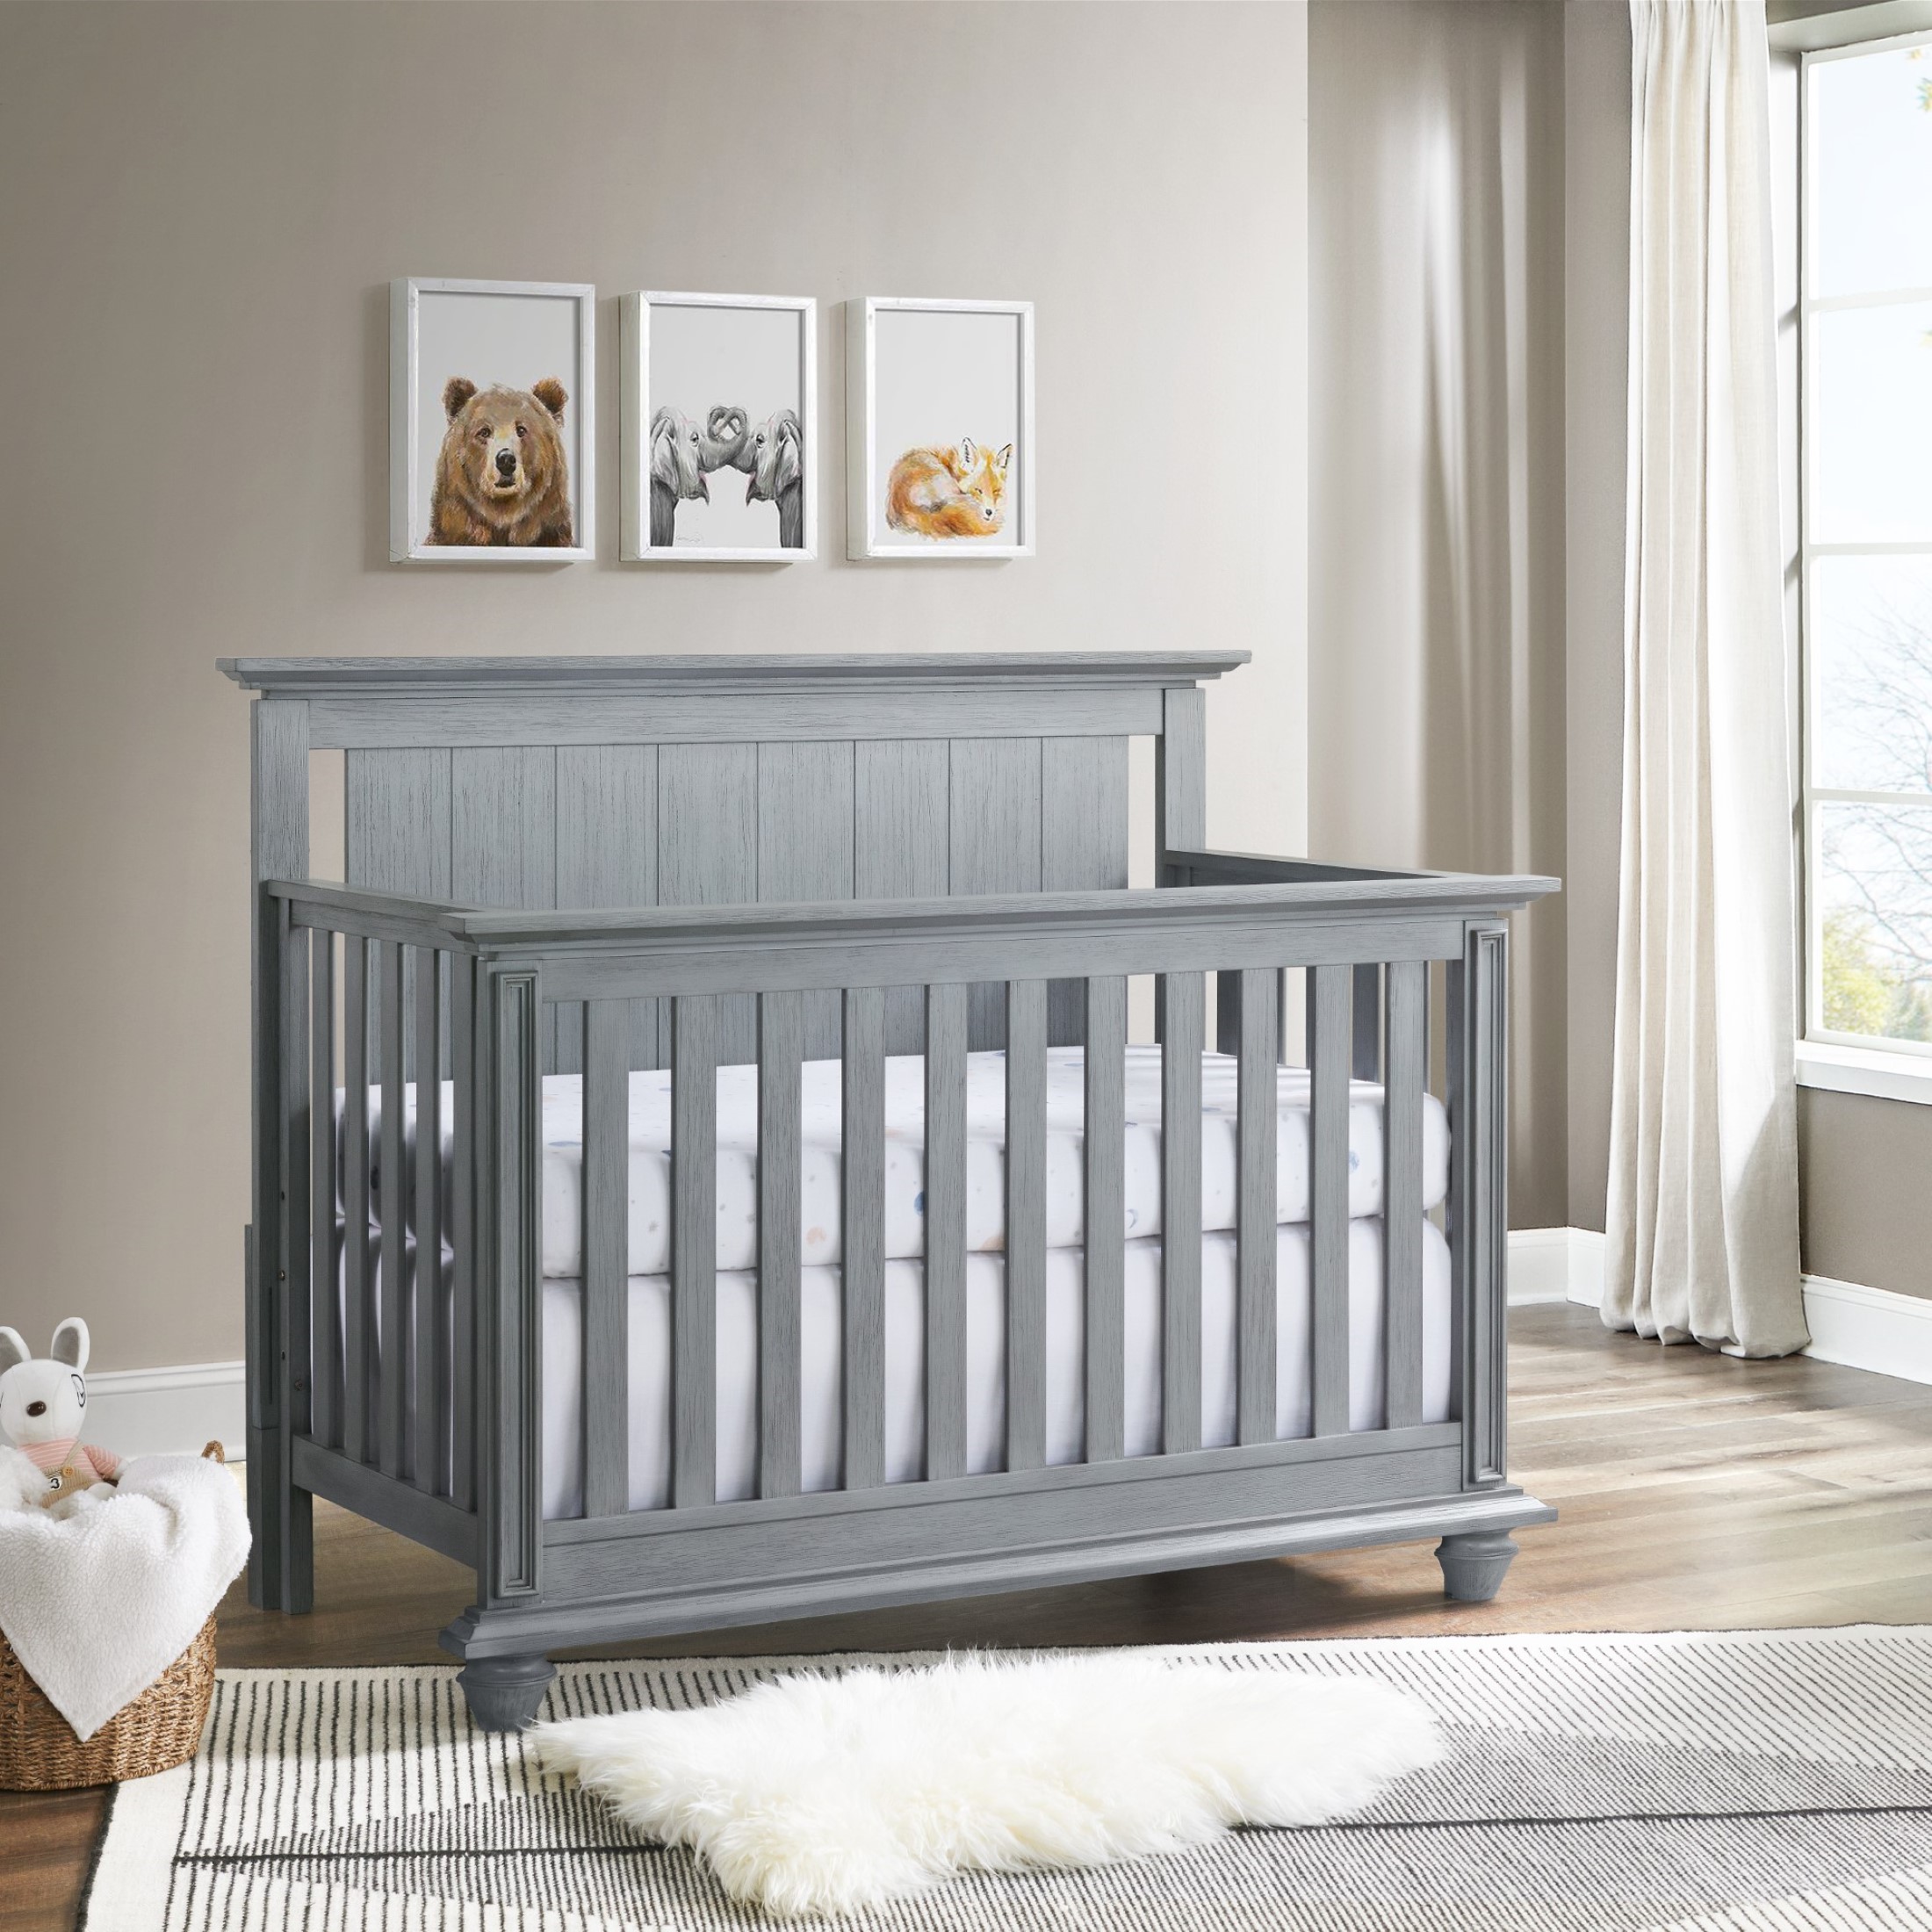 Oxford Baby Langston 4-in-1 Convertible Crib, Graphite Gray, Wooden Crib - image 1 of 11